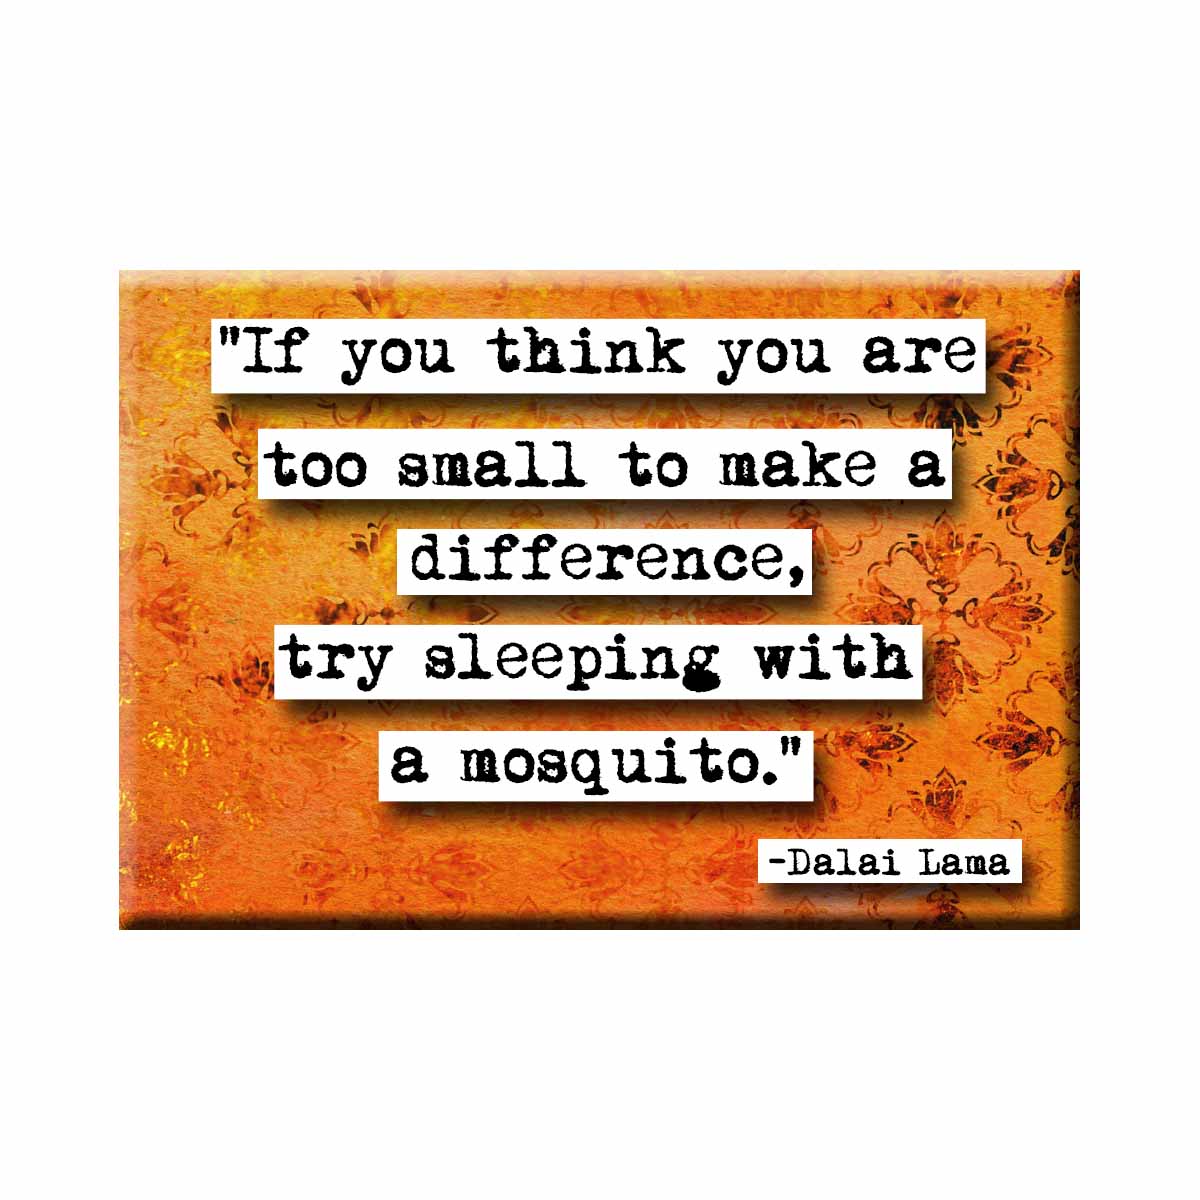 Dalai Lama Too Small to Make a Difference Quote Refrigerator Magnet